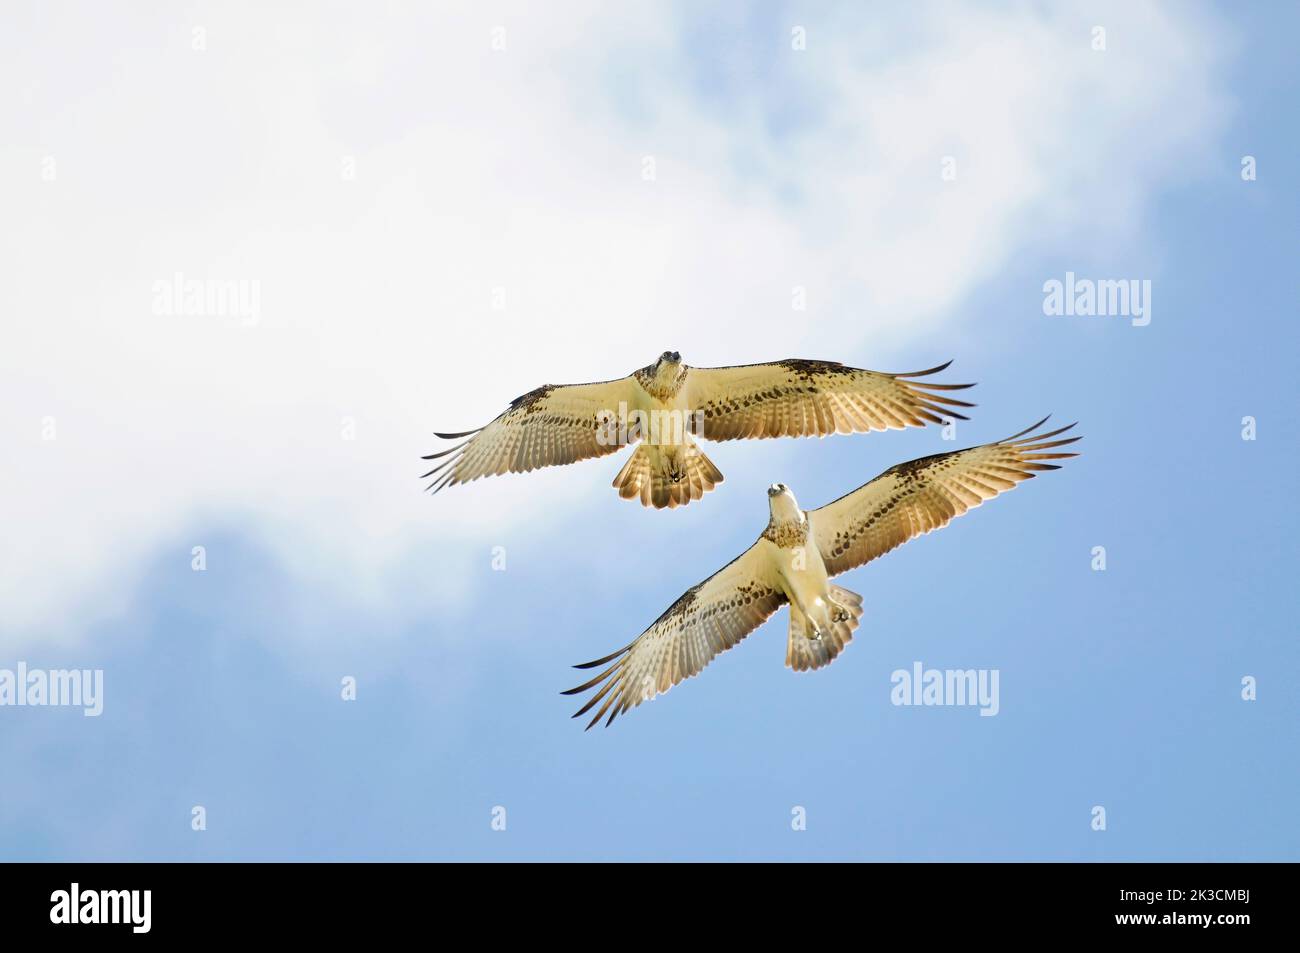 A pair of eastern ospreys (Pandion cristatus) in flight Stock Photo